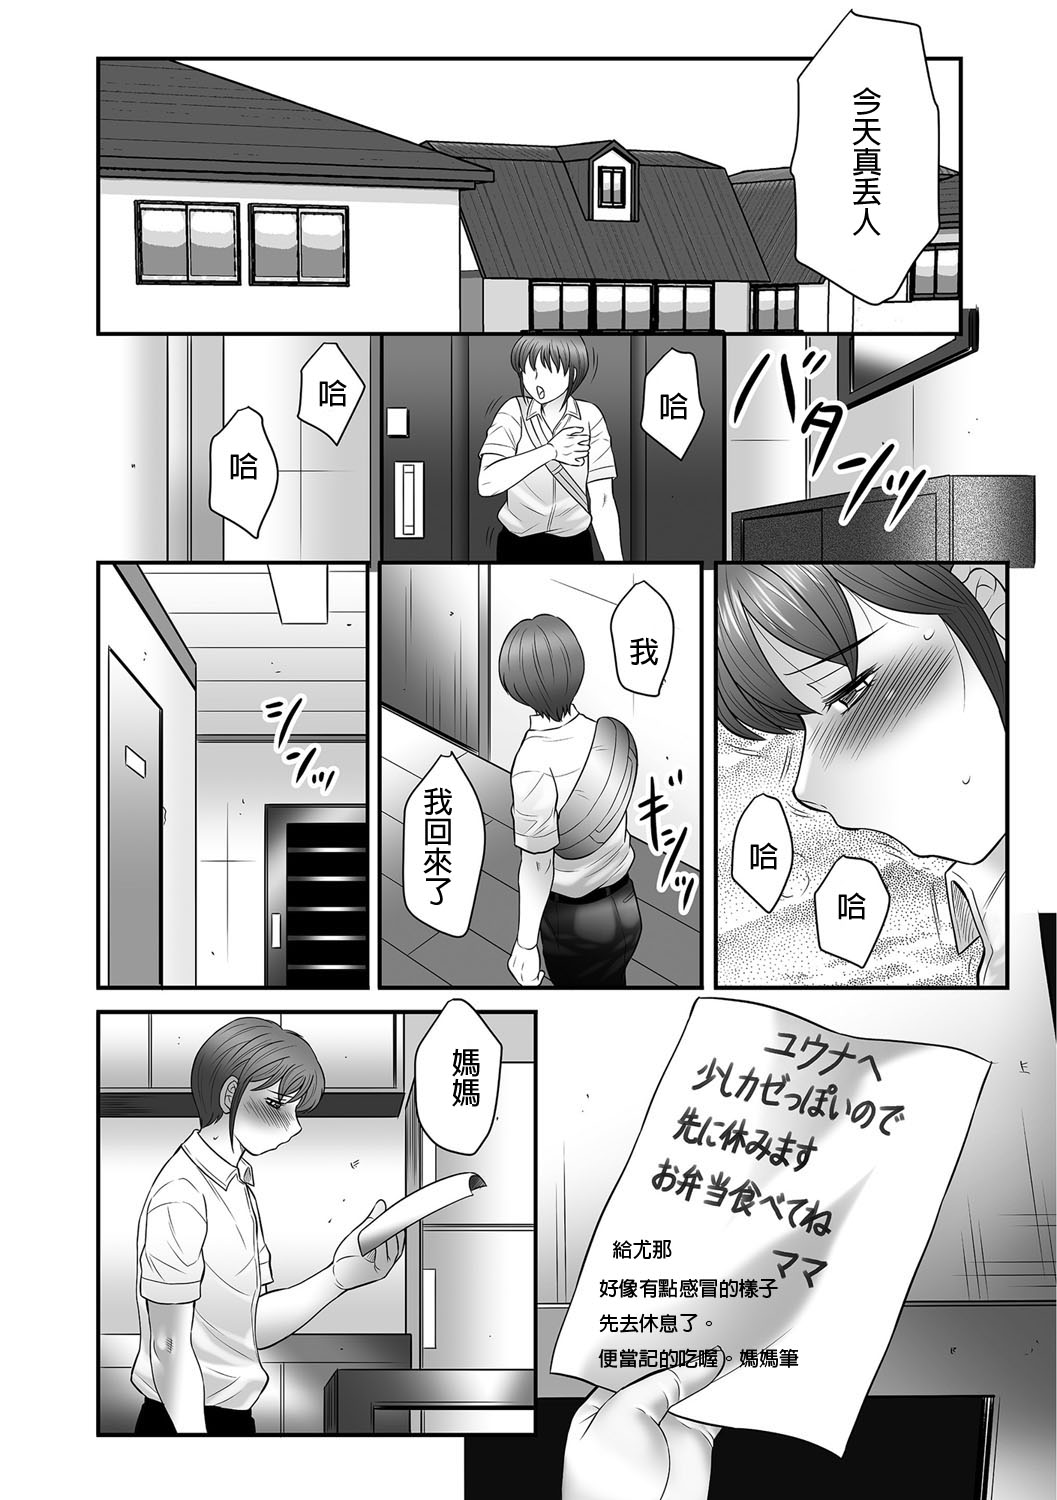 [Fuusen Club] Boshi no Susume - The advice of the mother and child Ch. 9-10 [風船クラブ] 母子のすすめ 第9-10話